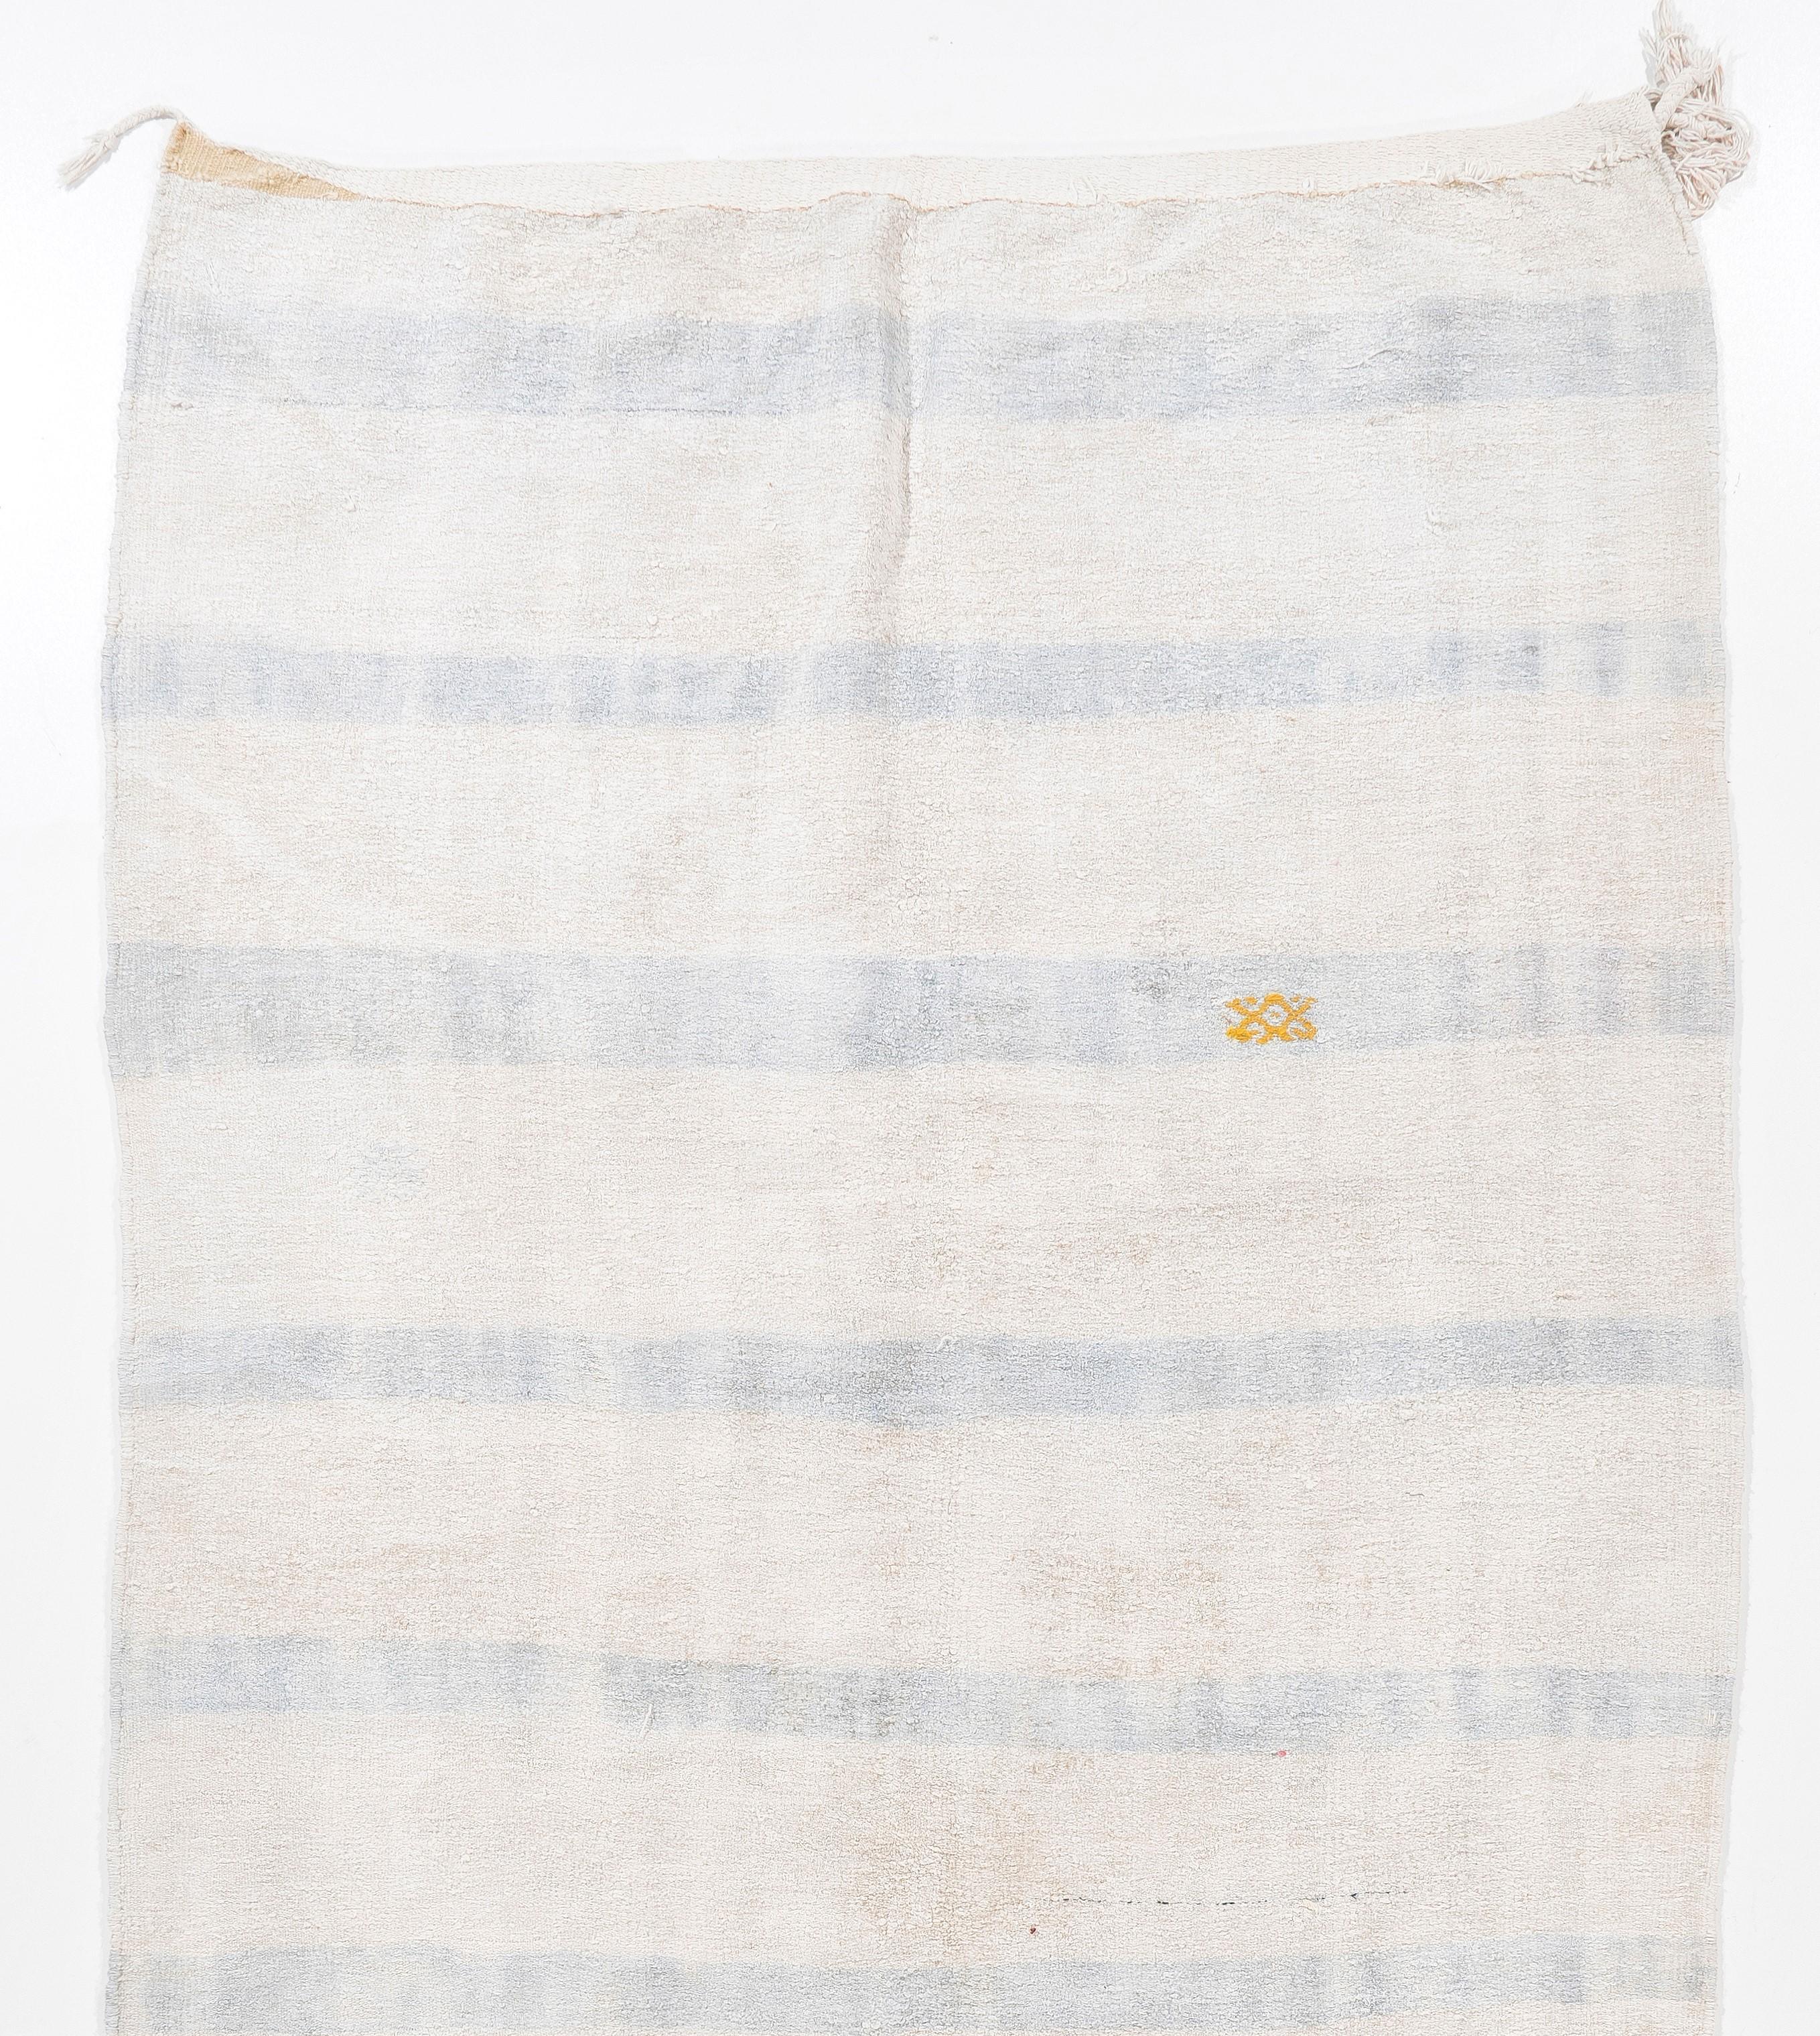 An authentic vintage handmade flat-weave (Kilim) from Eastern Turkey, handwoven by Nomads to be used as floor coverings in their tents and winter homes. This cotton kilim features a simple striped design in washed out tones of blue and pinkish light